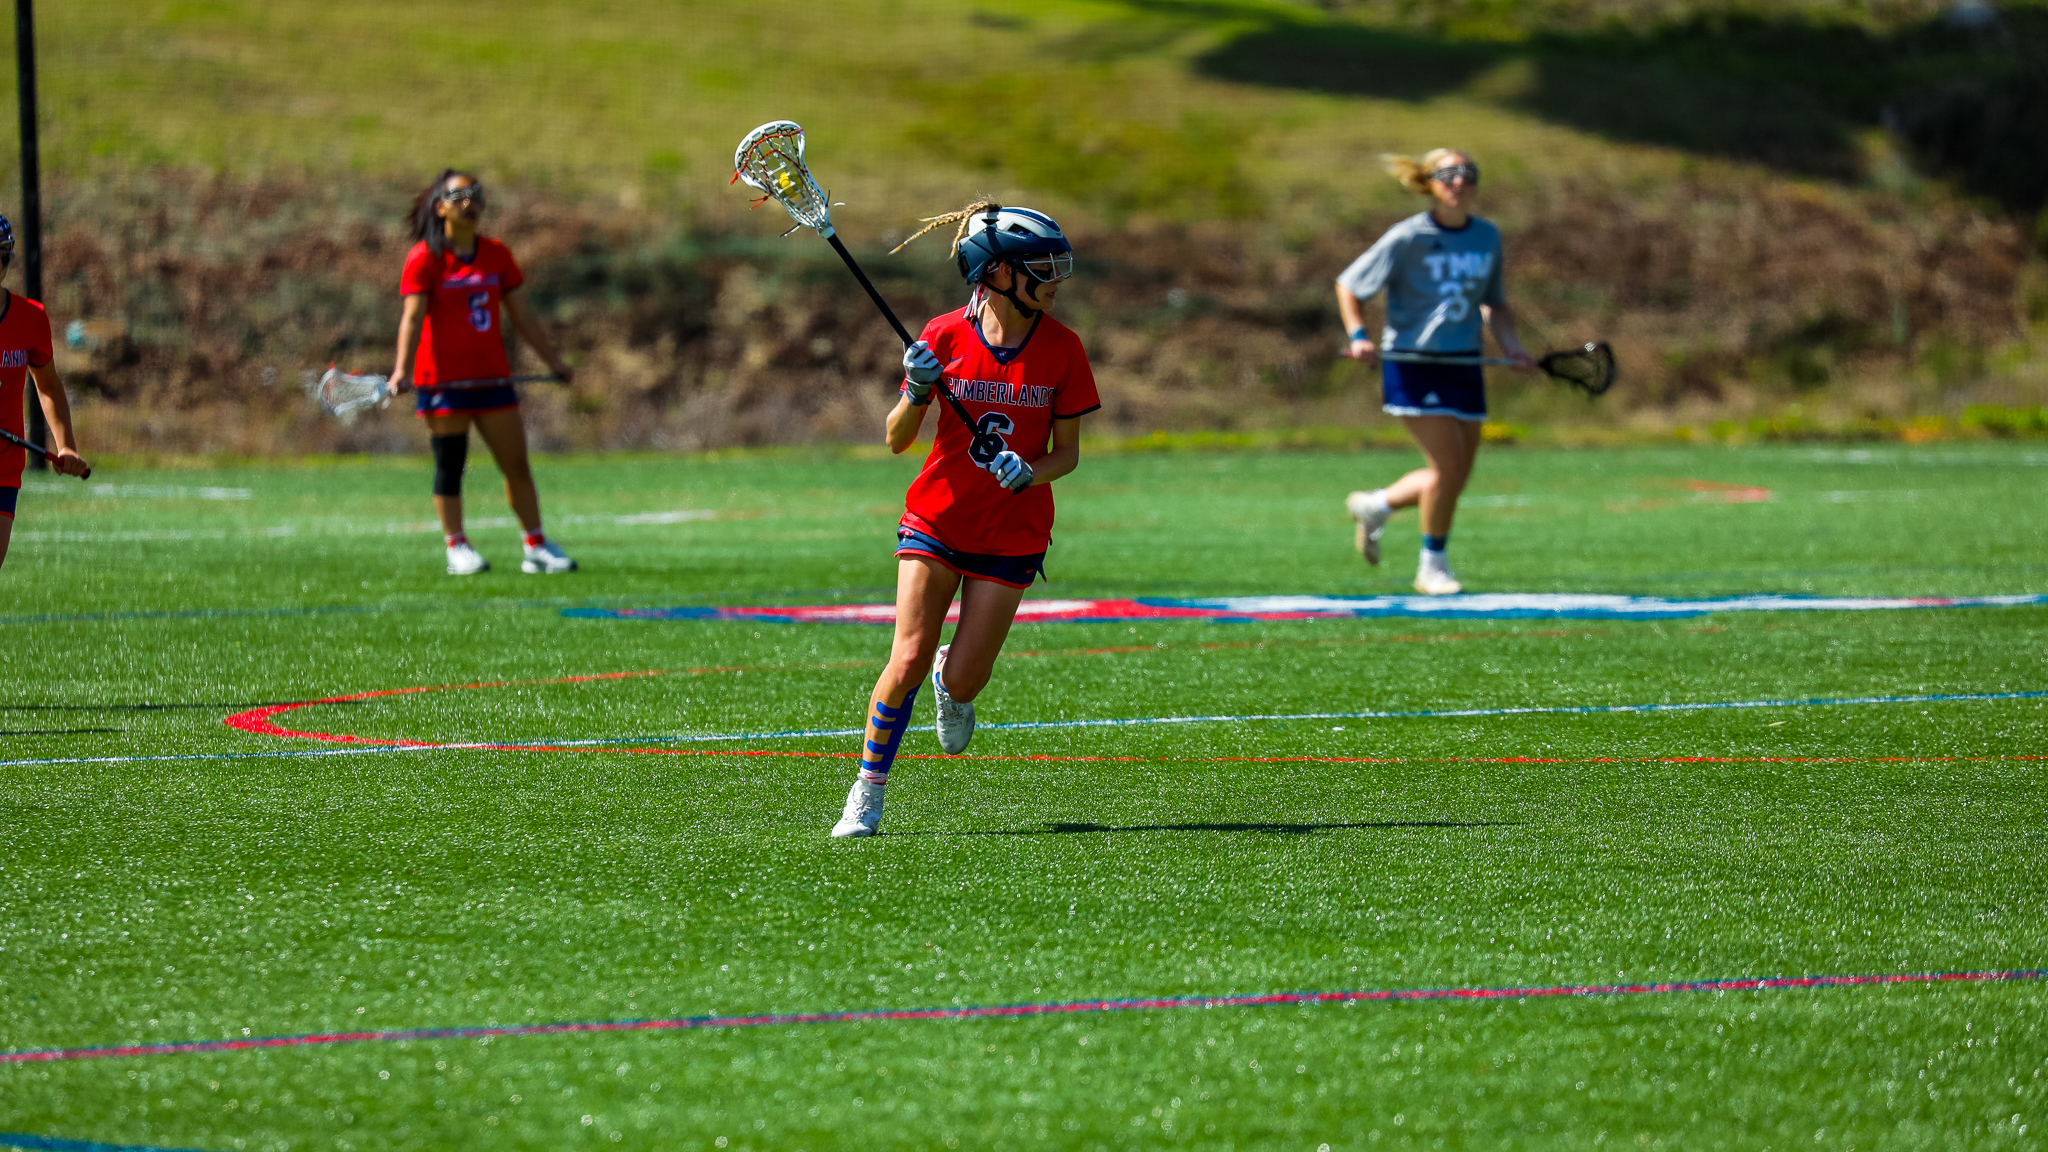 2023 NAIA Women's Lacrosse Players of the Week